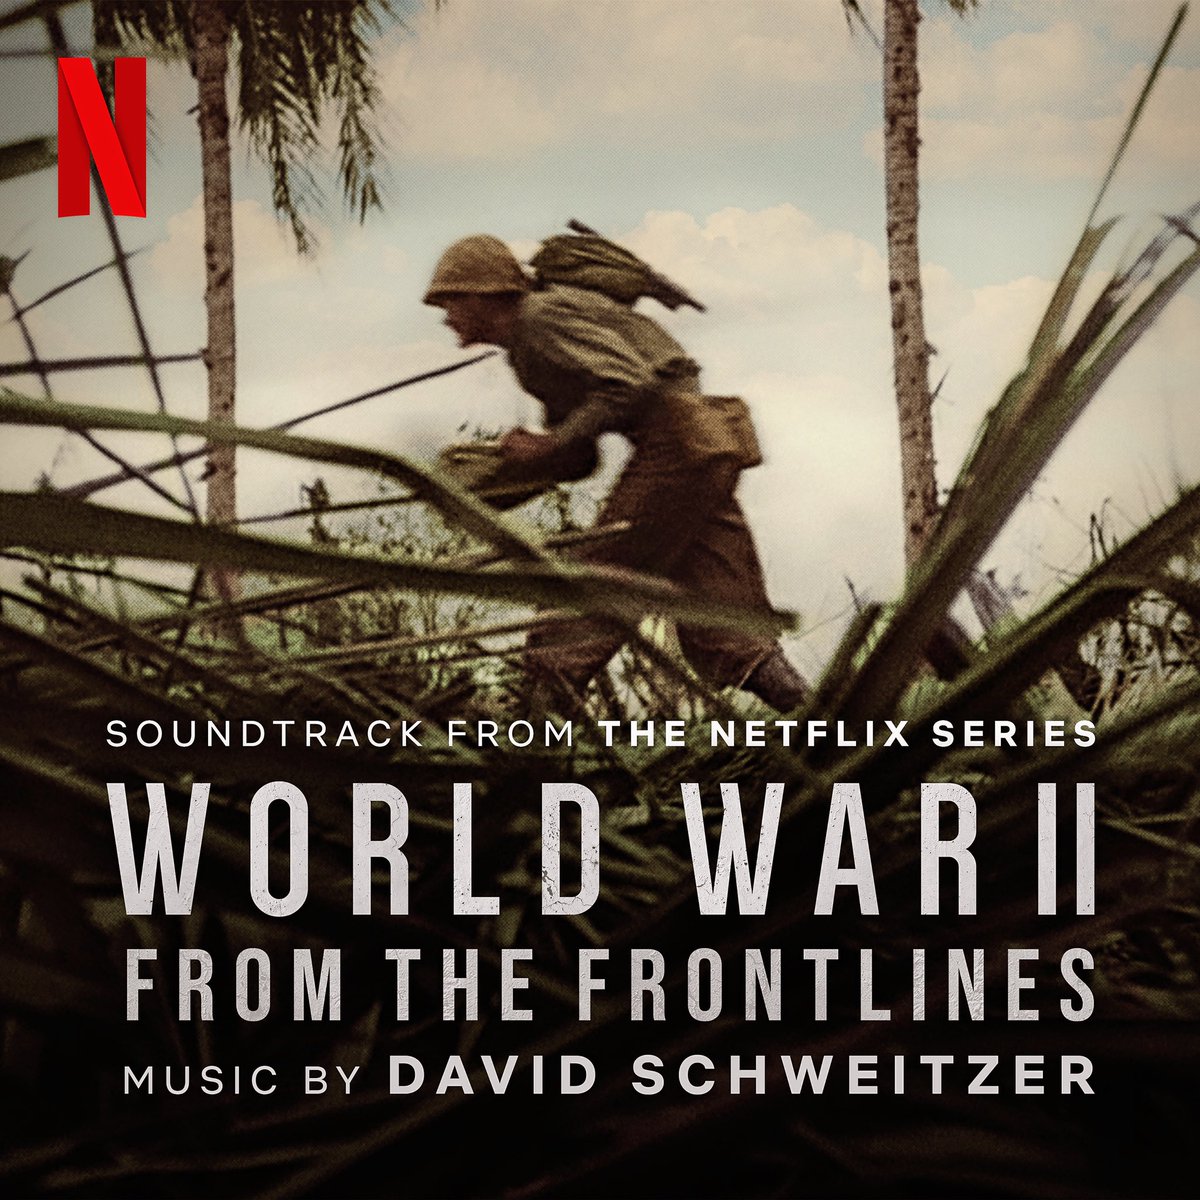 World War II: From the Frontlines is out on @Netflix! With enhanced footage, narration by @JohnBoyega, and a gripping score by @SchweitzerMuzik you won't want to miss it. Soundtrack also available from usual places. Thanks for having me on this one! #WorldWarIIfromthefrontlines